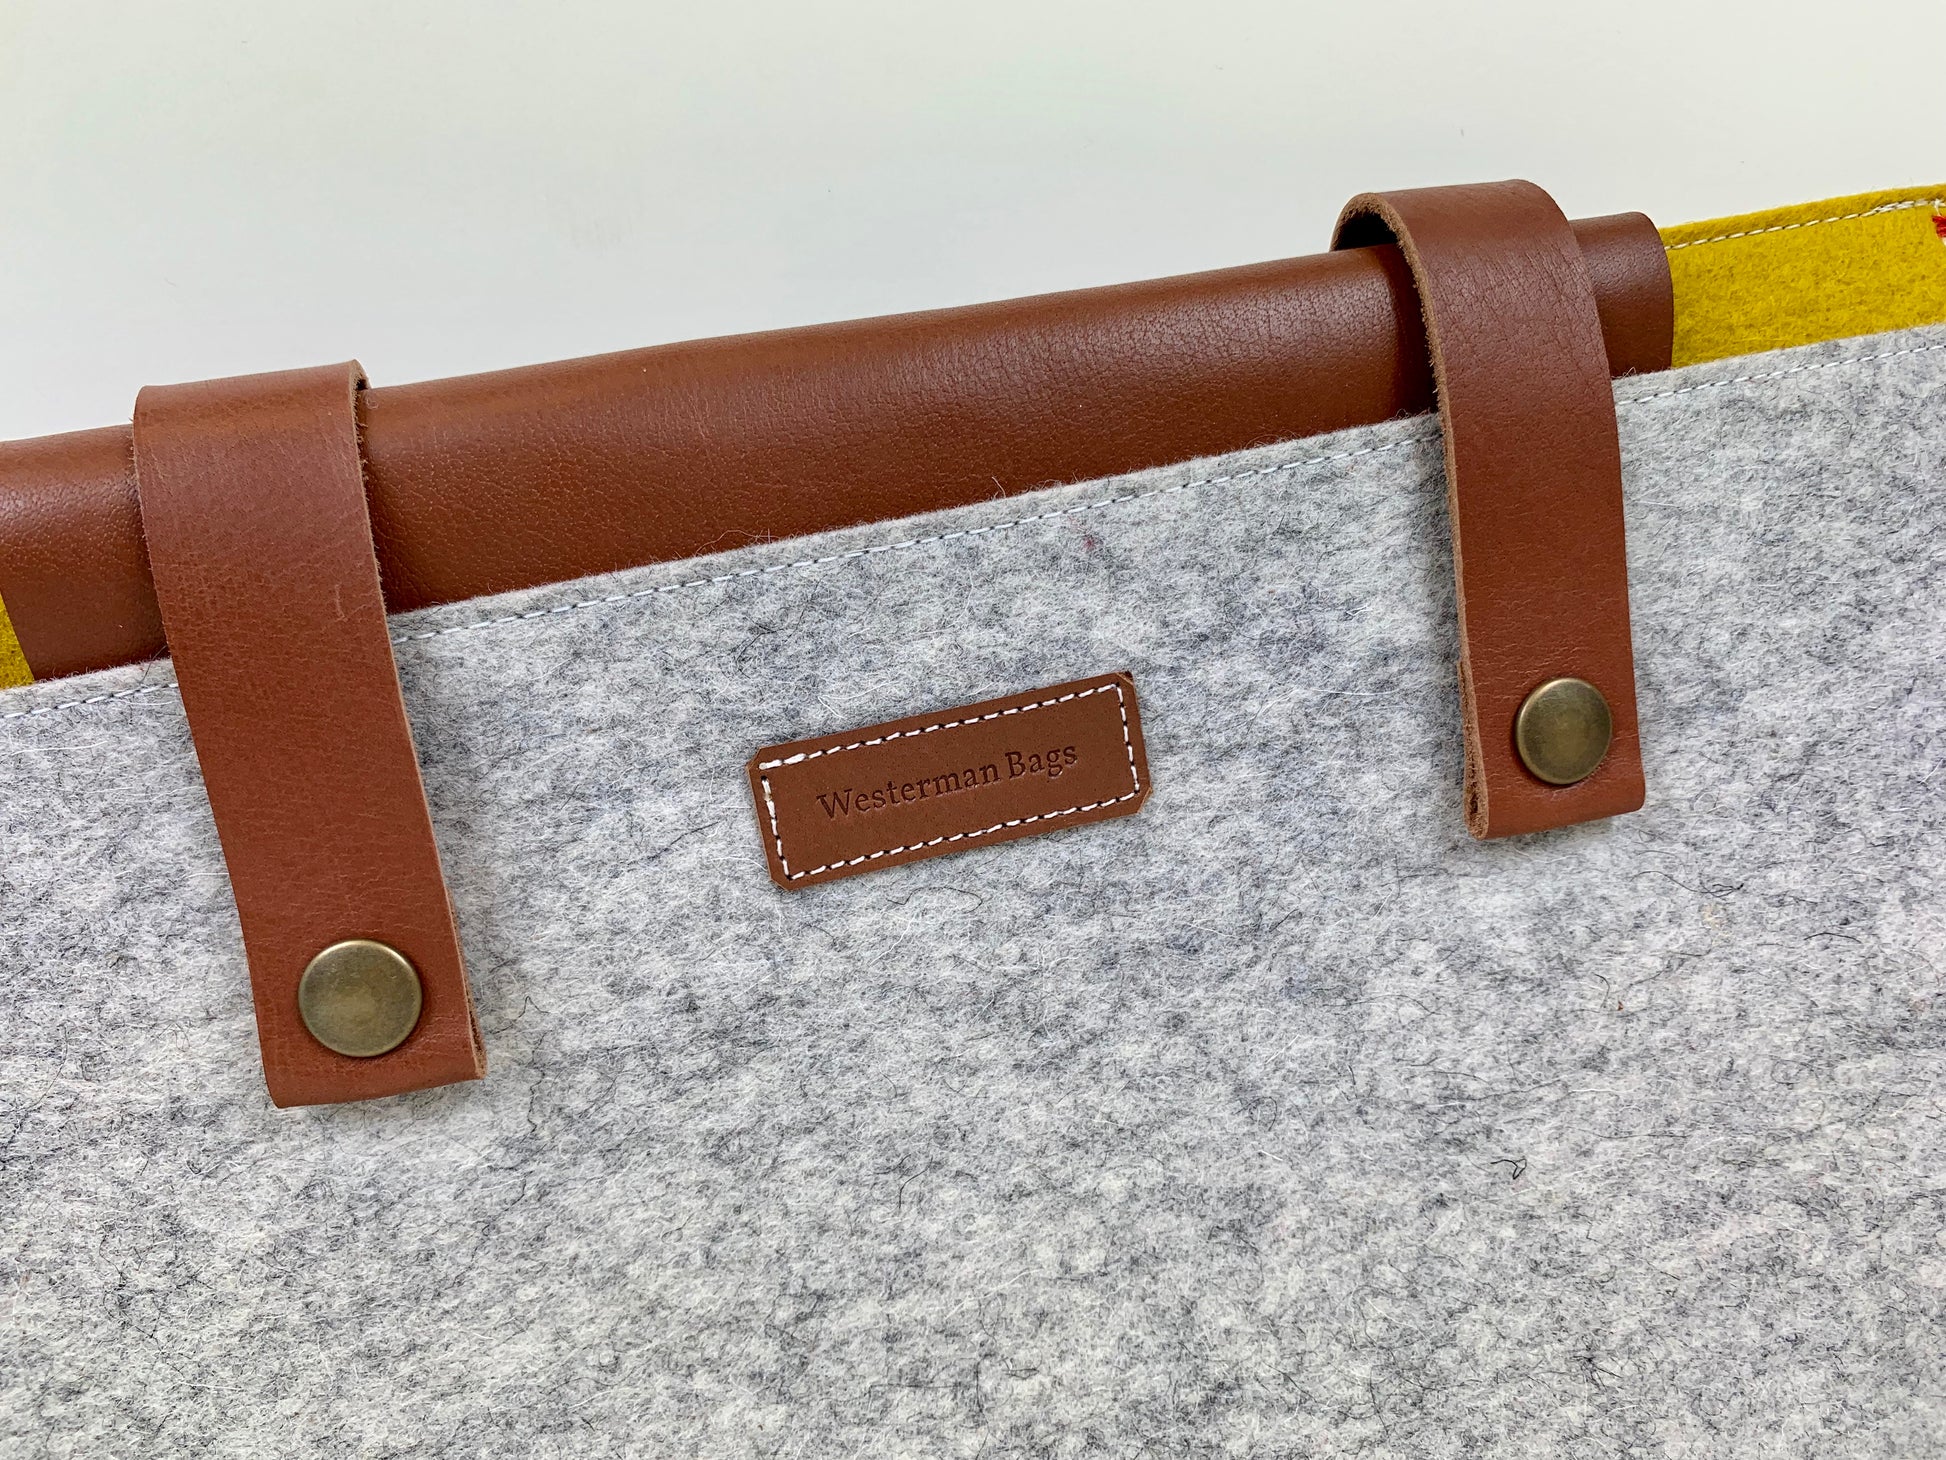 MacBook Air felt case with leather logo Westerman Bags